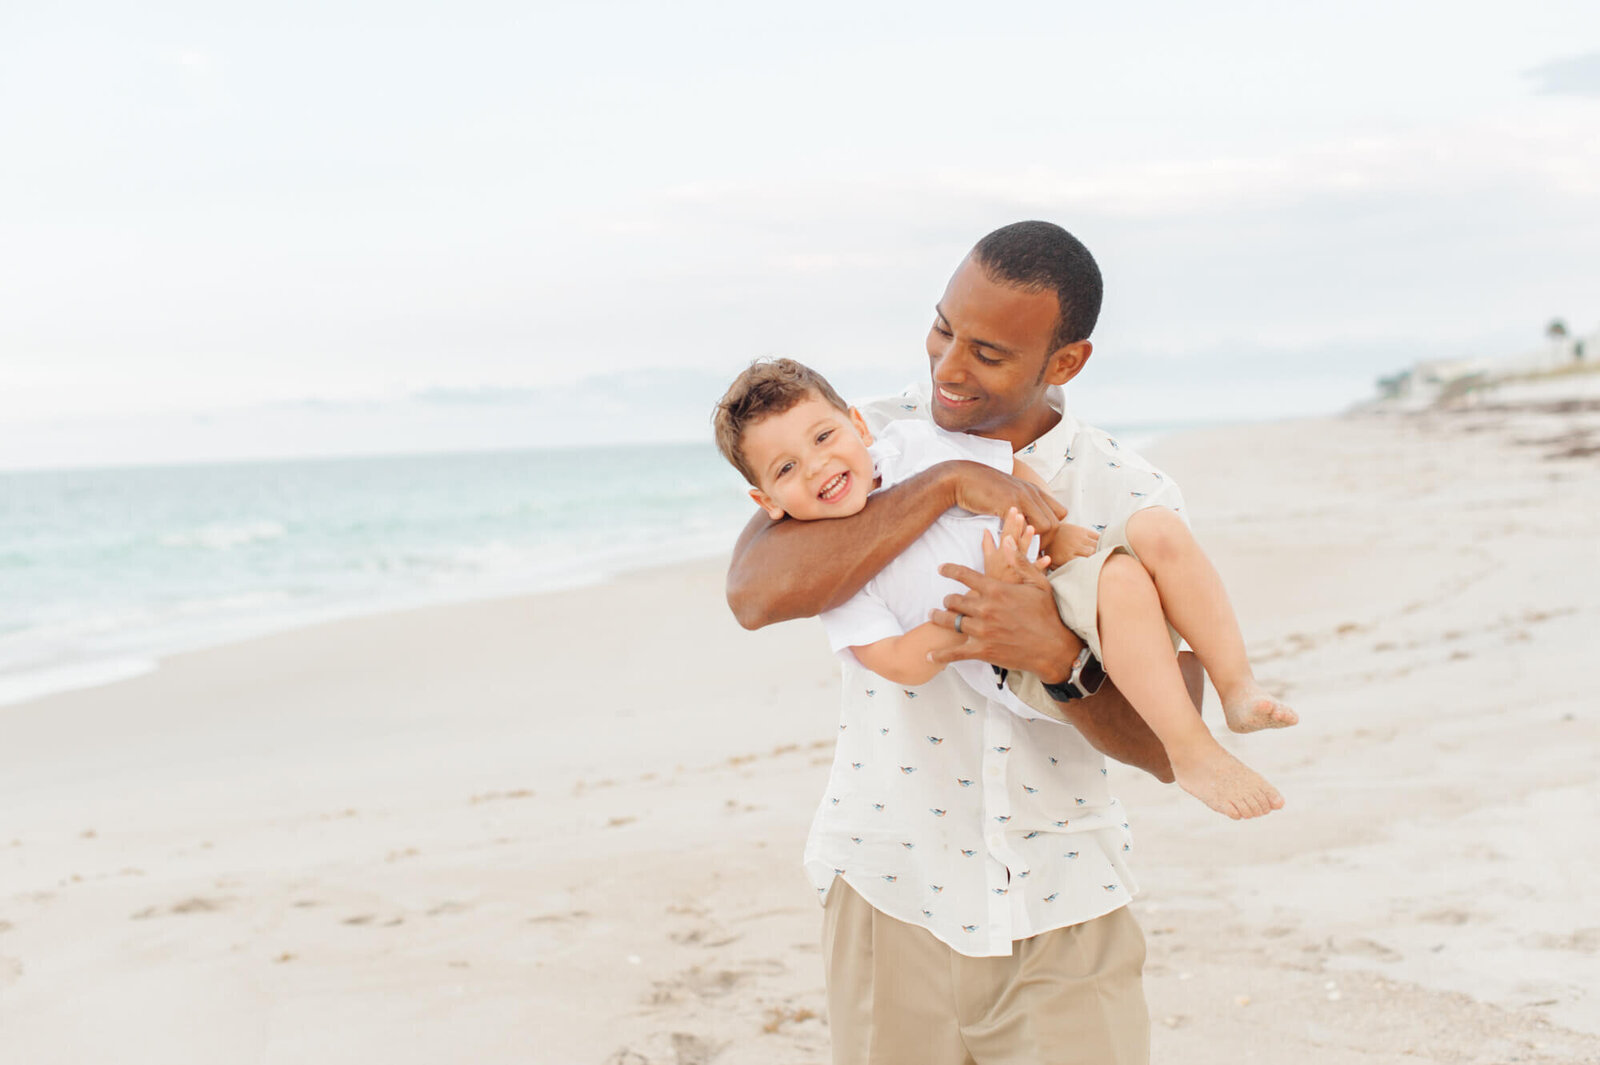 Dad tickles young son while holding him on the beach during their family photo session